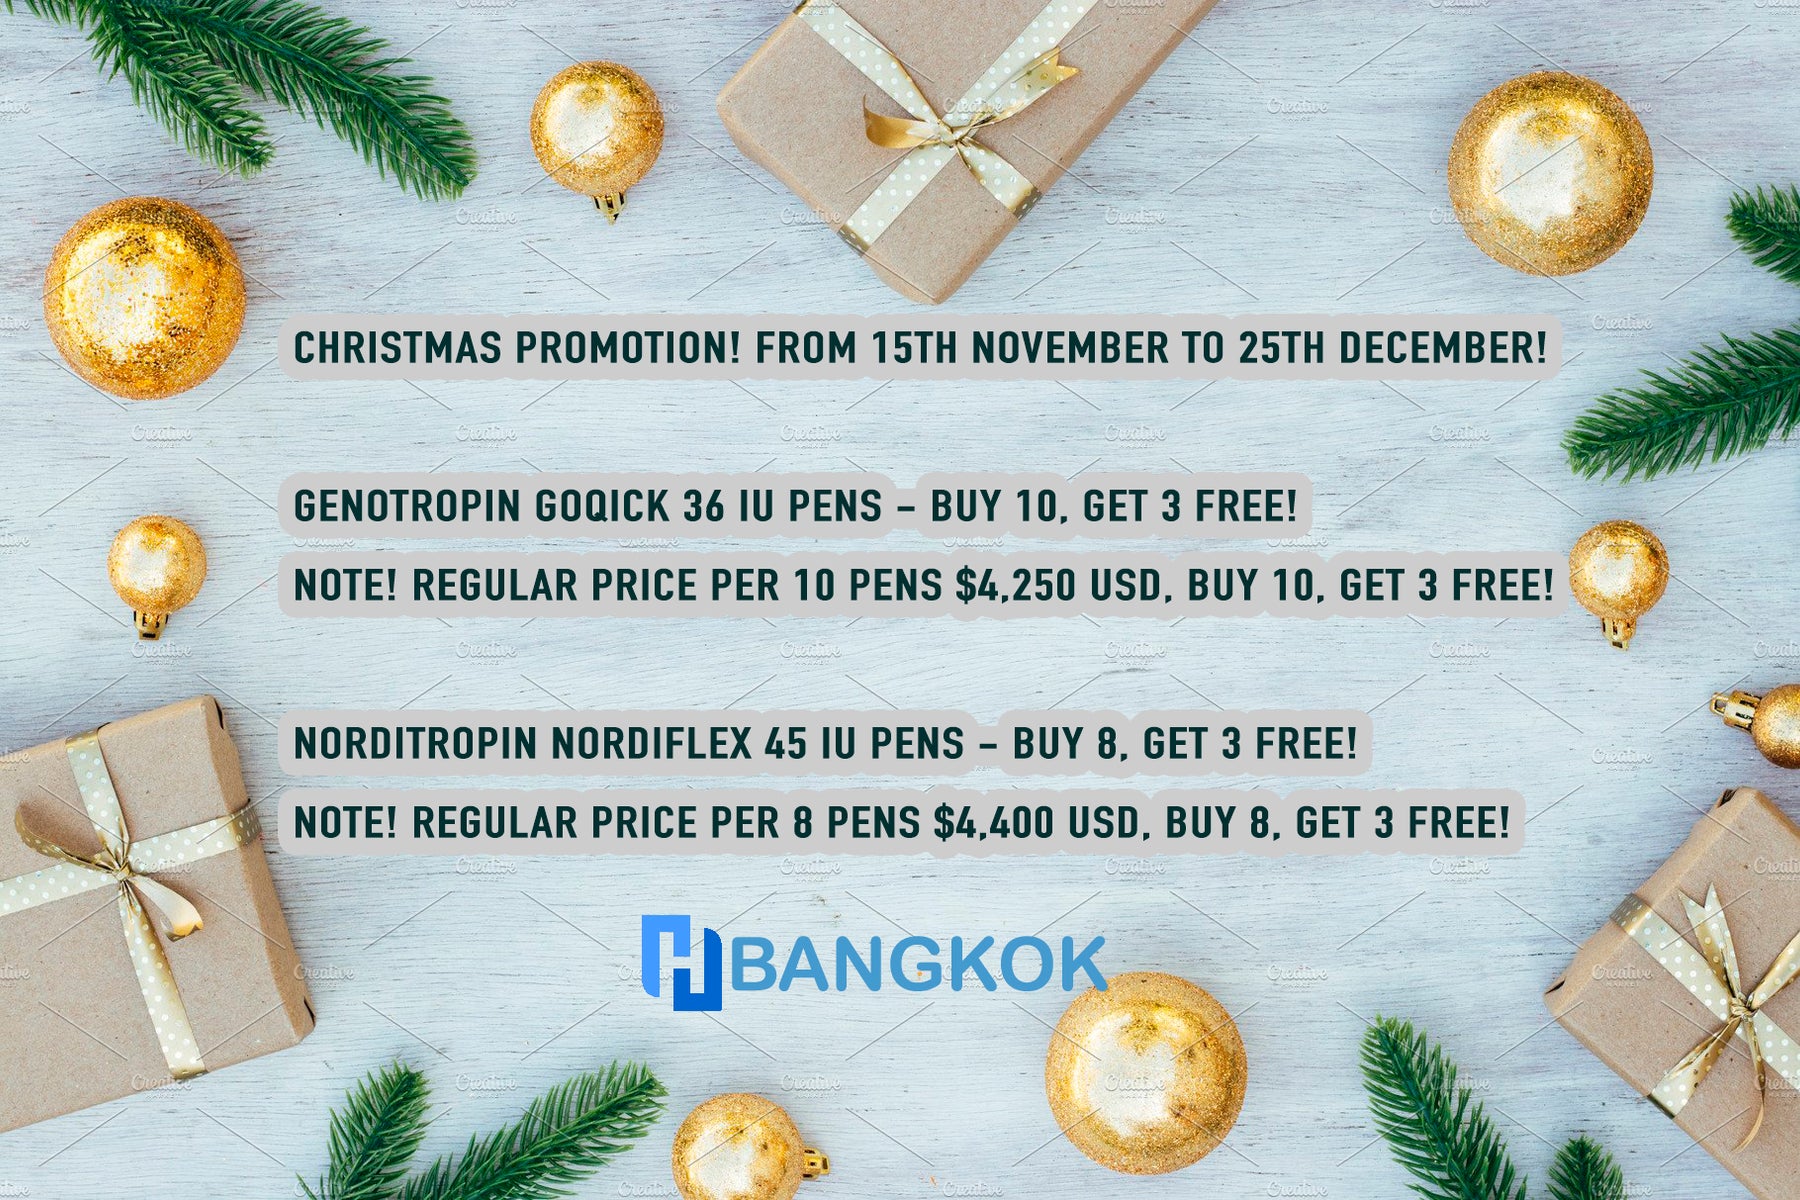 Christmas promotion! 🎄Only from 15th November to 25th December!